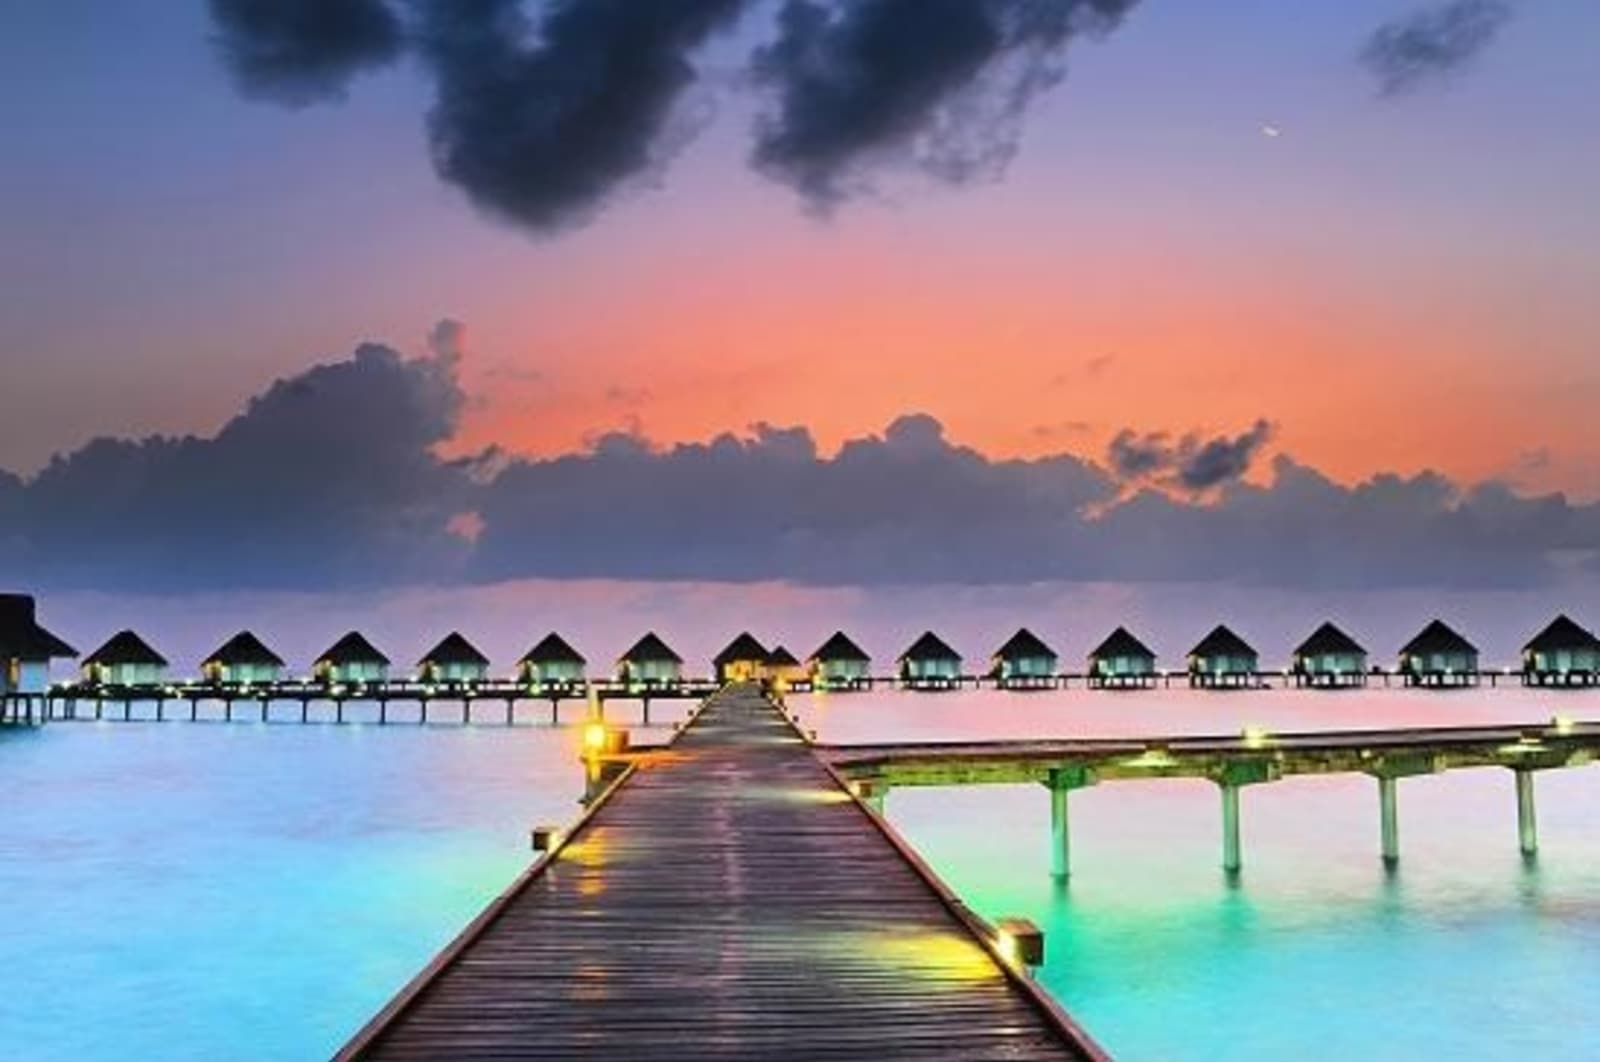 Resort in the Maldives at sunset.